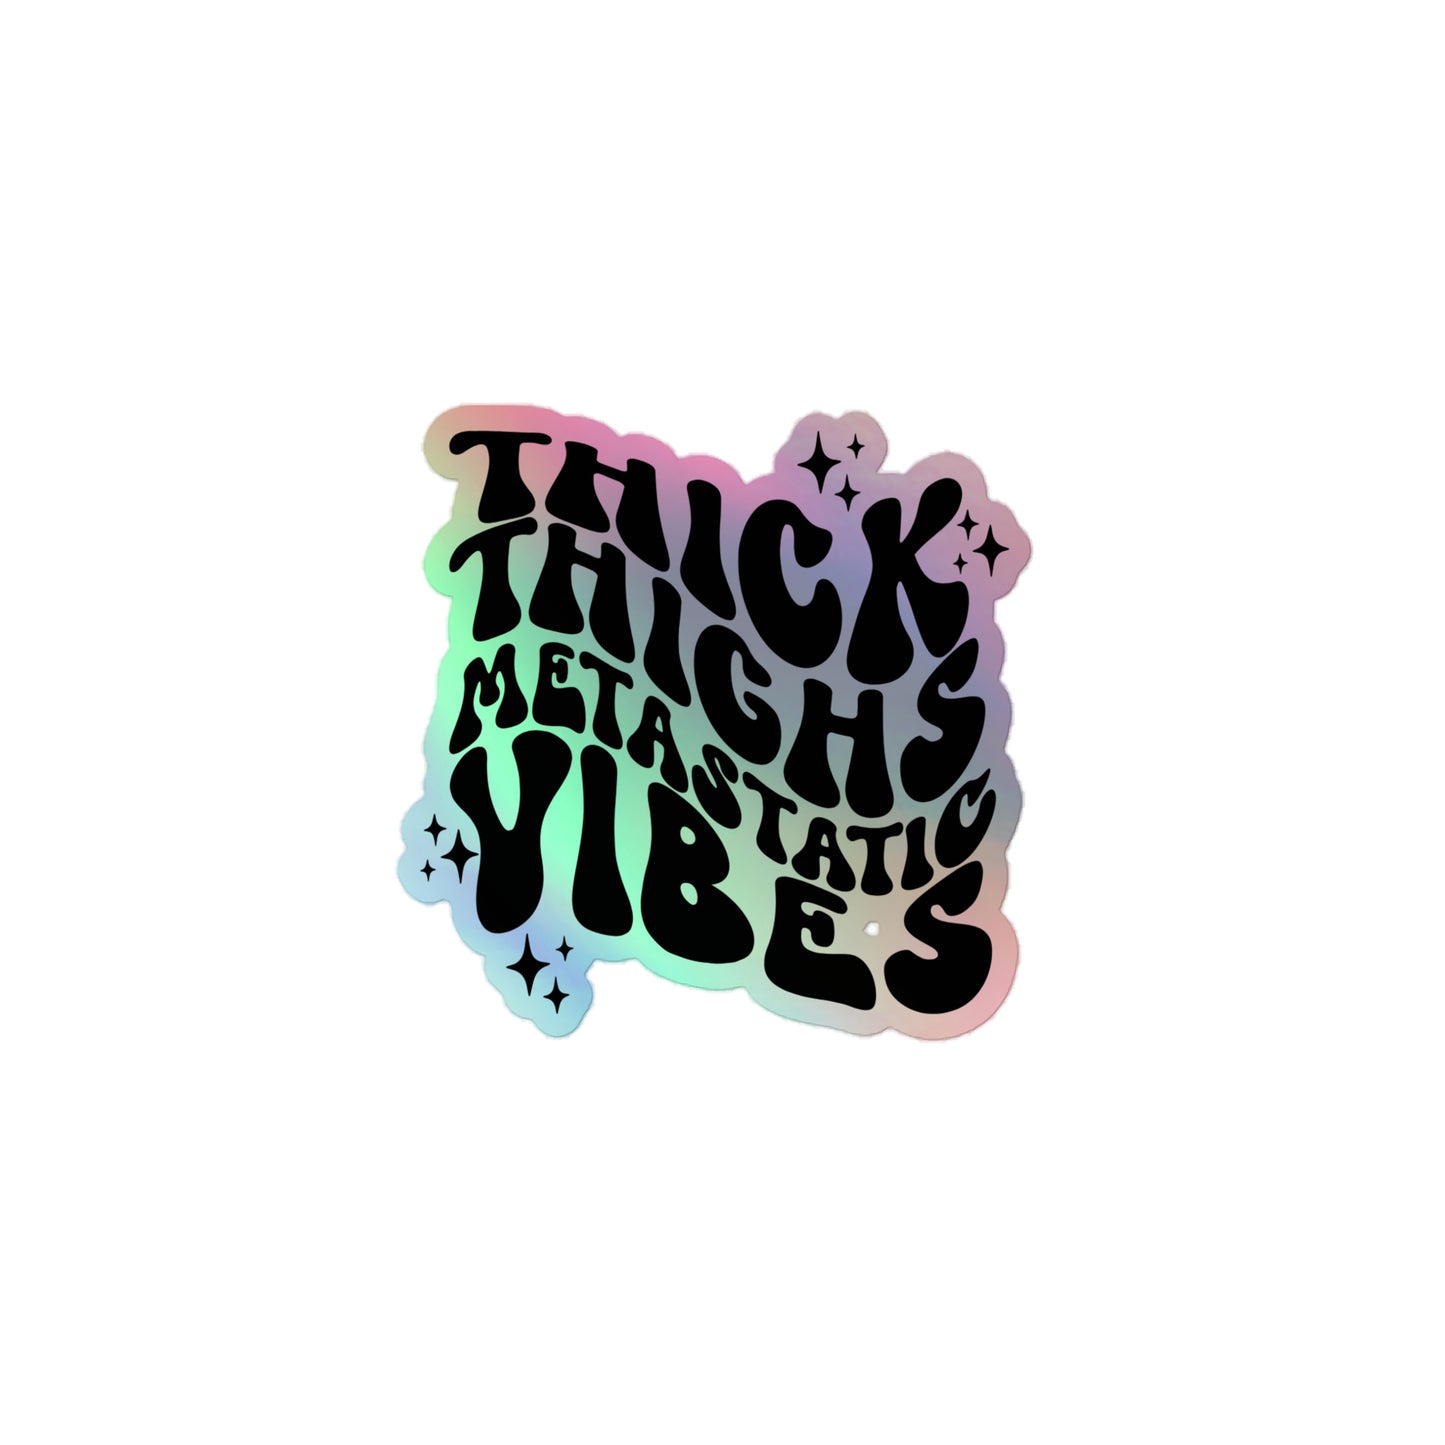 Thick Thighs Metastatic Vibes© Holographic Sticker